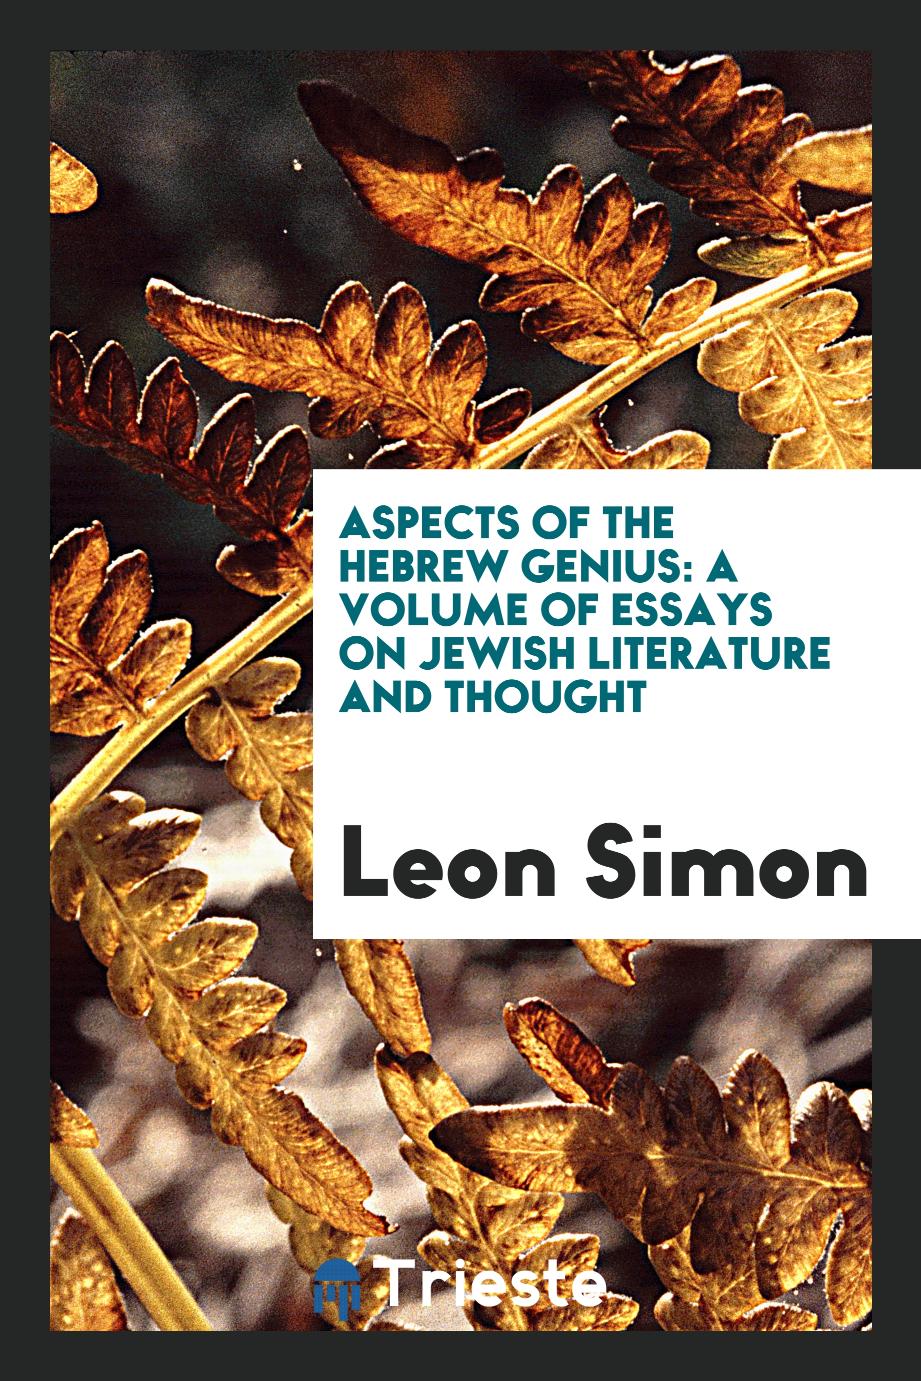 Aspects of the Hebrew genius: a volume of essays on Jewish literature and thought